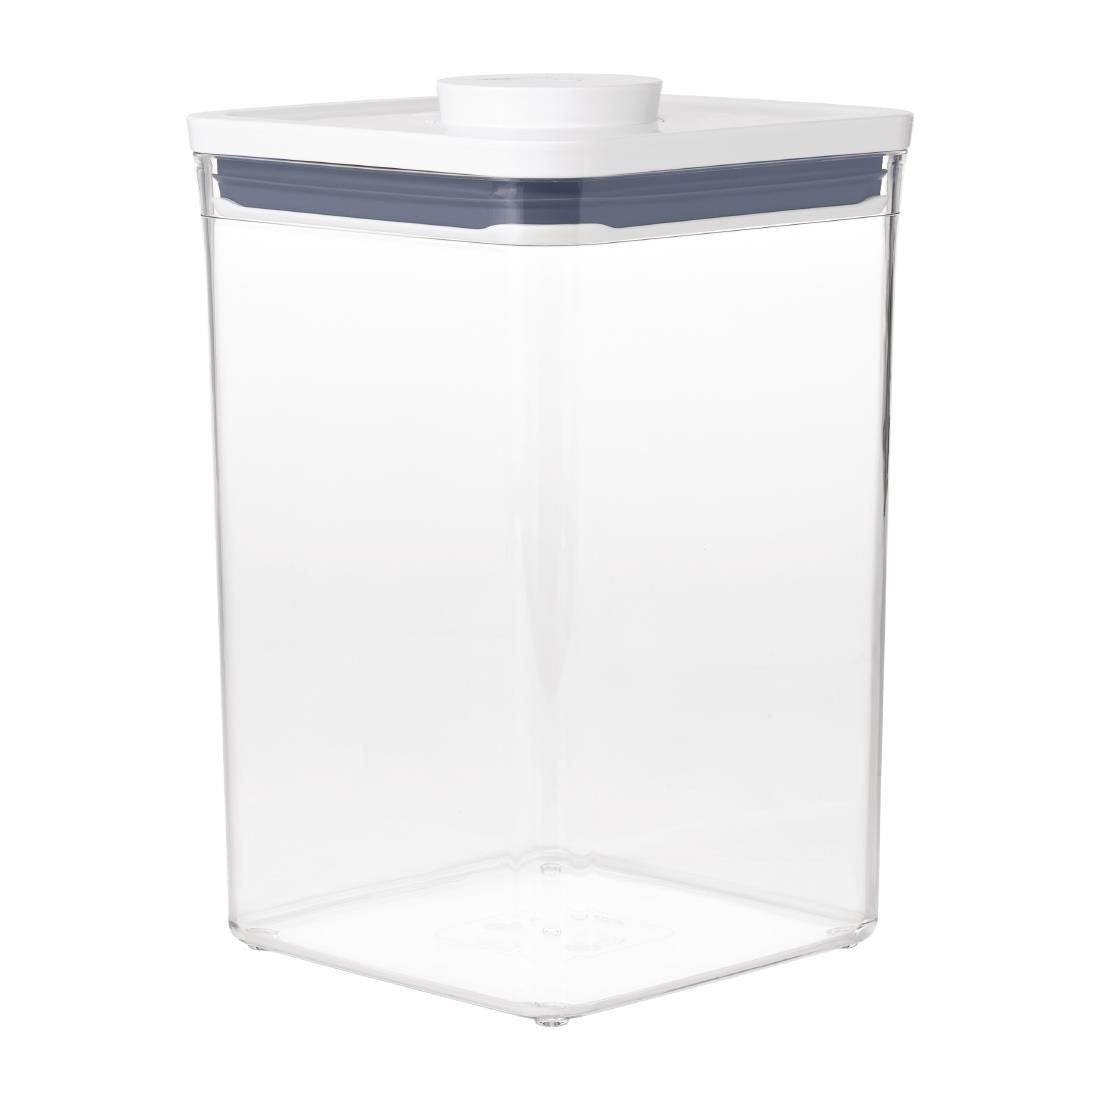 FB084 Oxo Good Grips POP Container Square Large Medium JD Catering Equipment Solutions Ltd